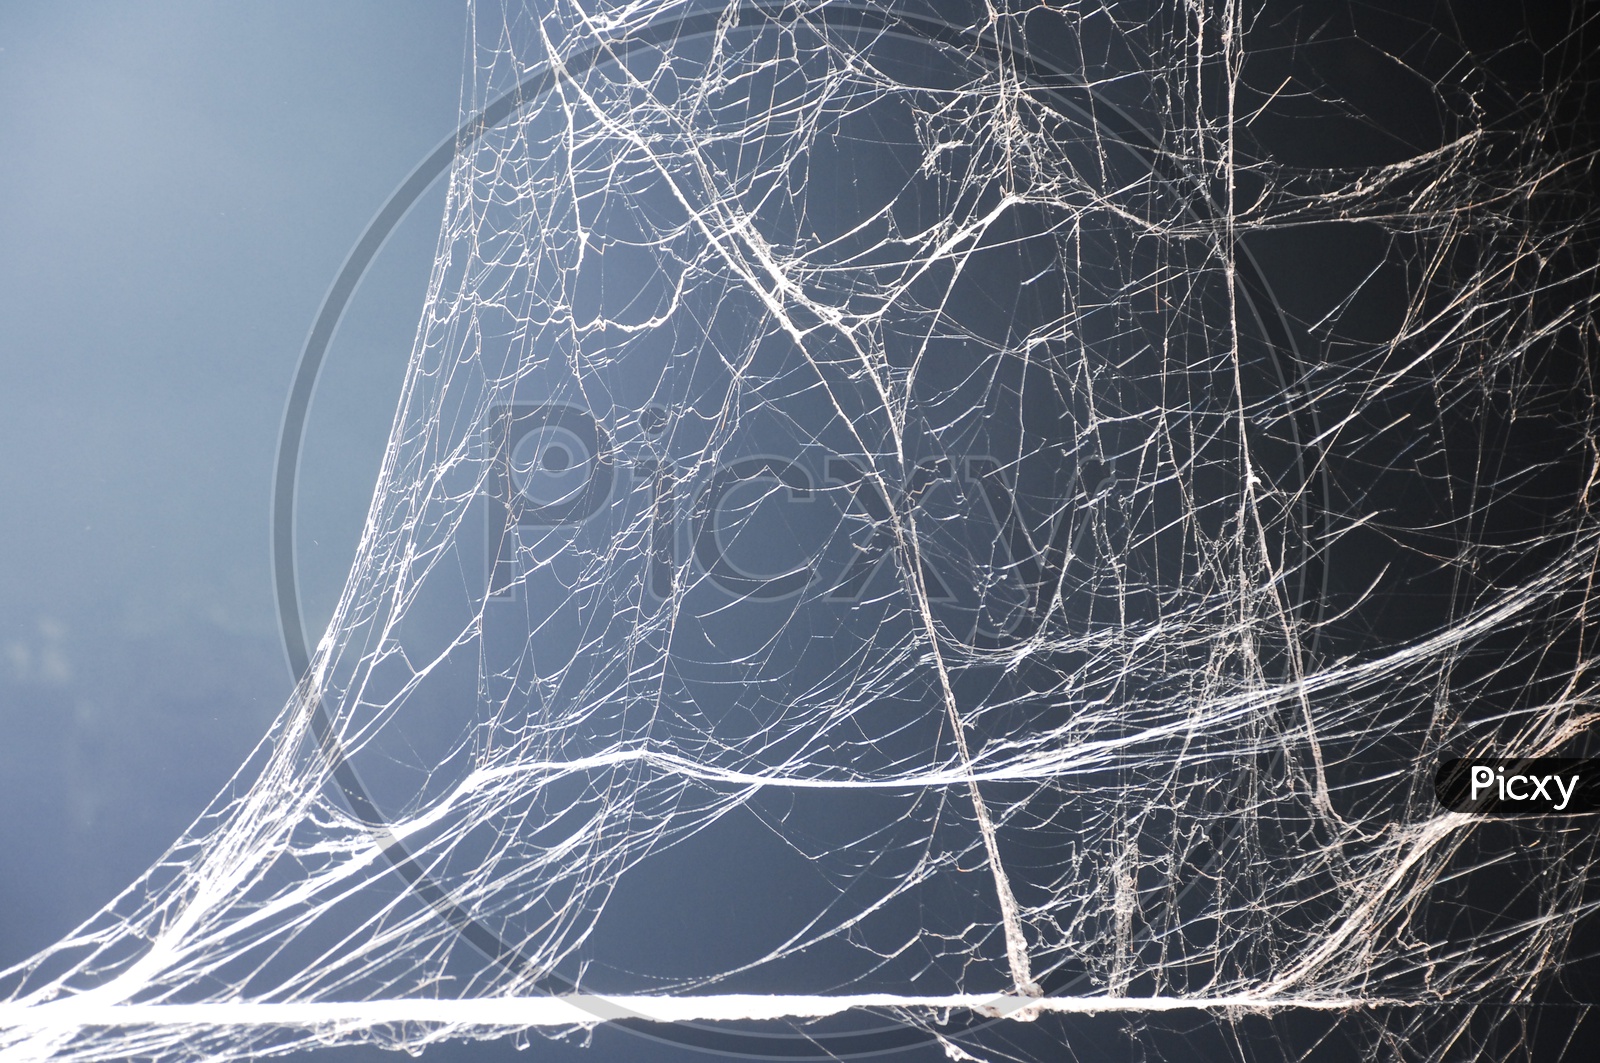 Abstract Spider Web